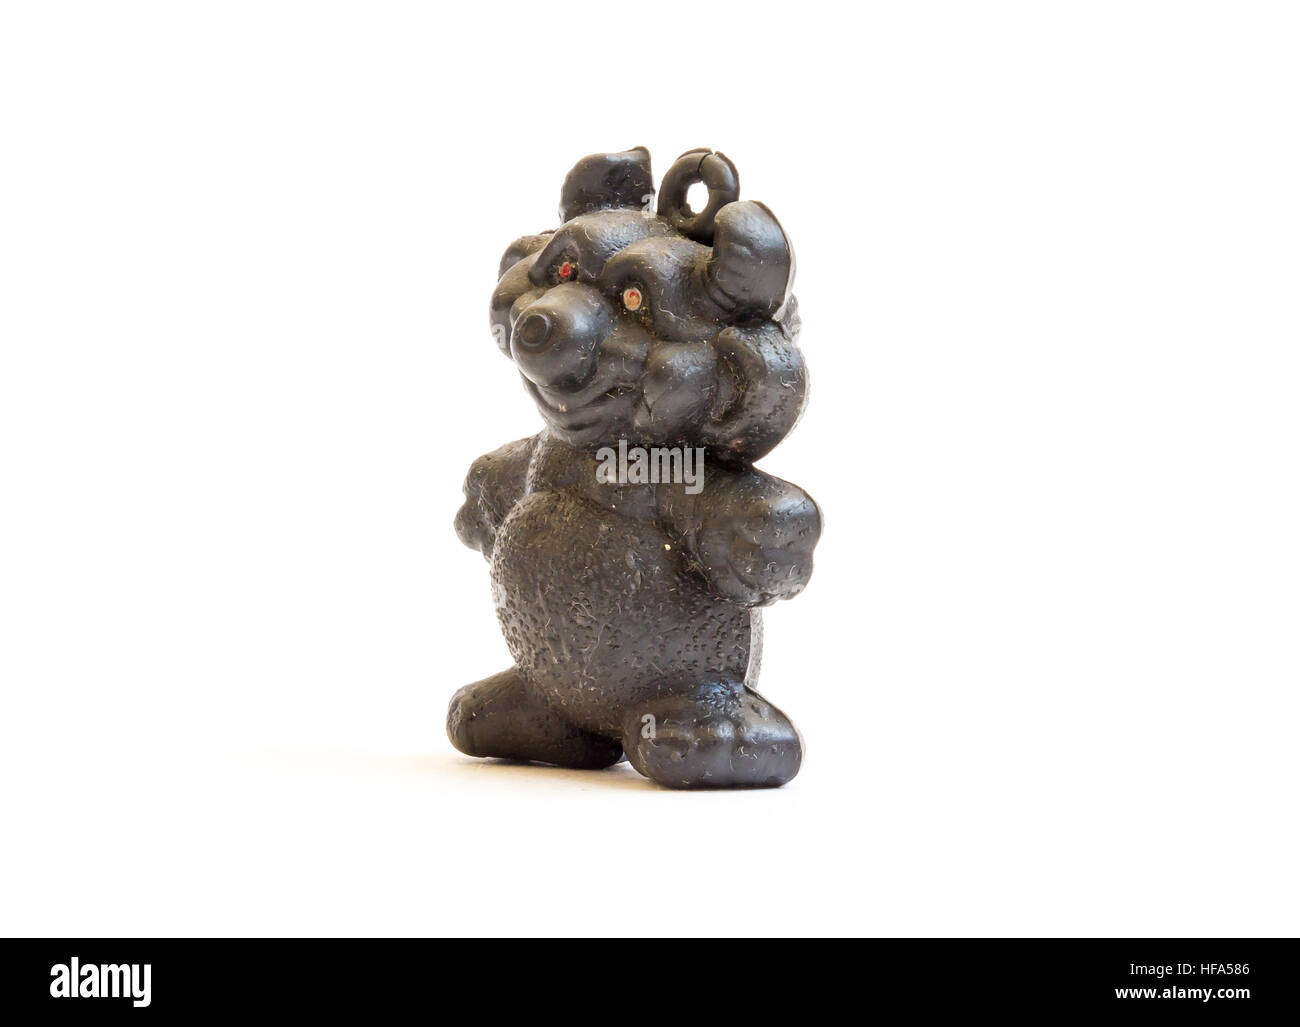 The Miniature isolated toy bear. Stock Photo